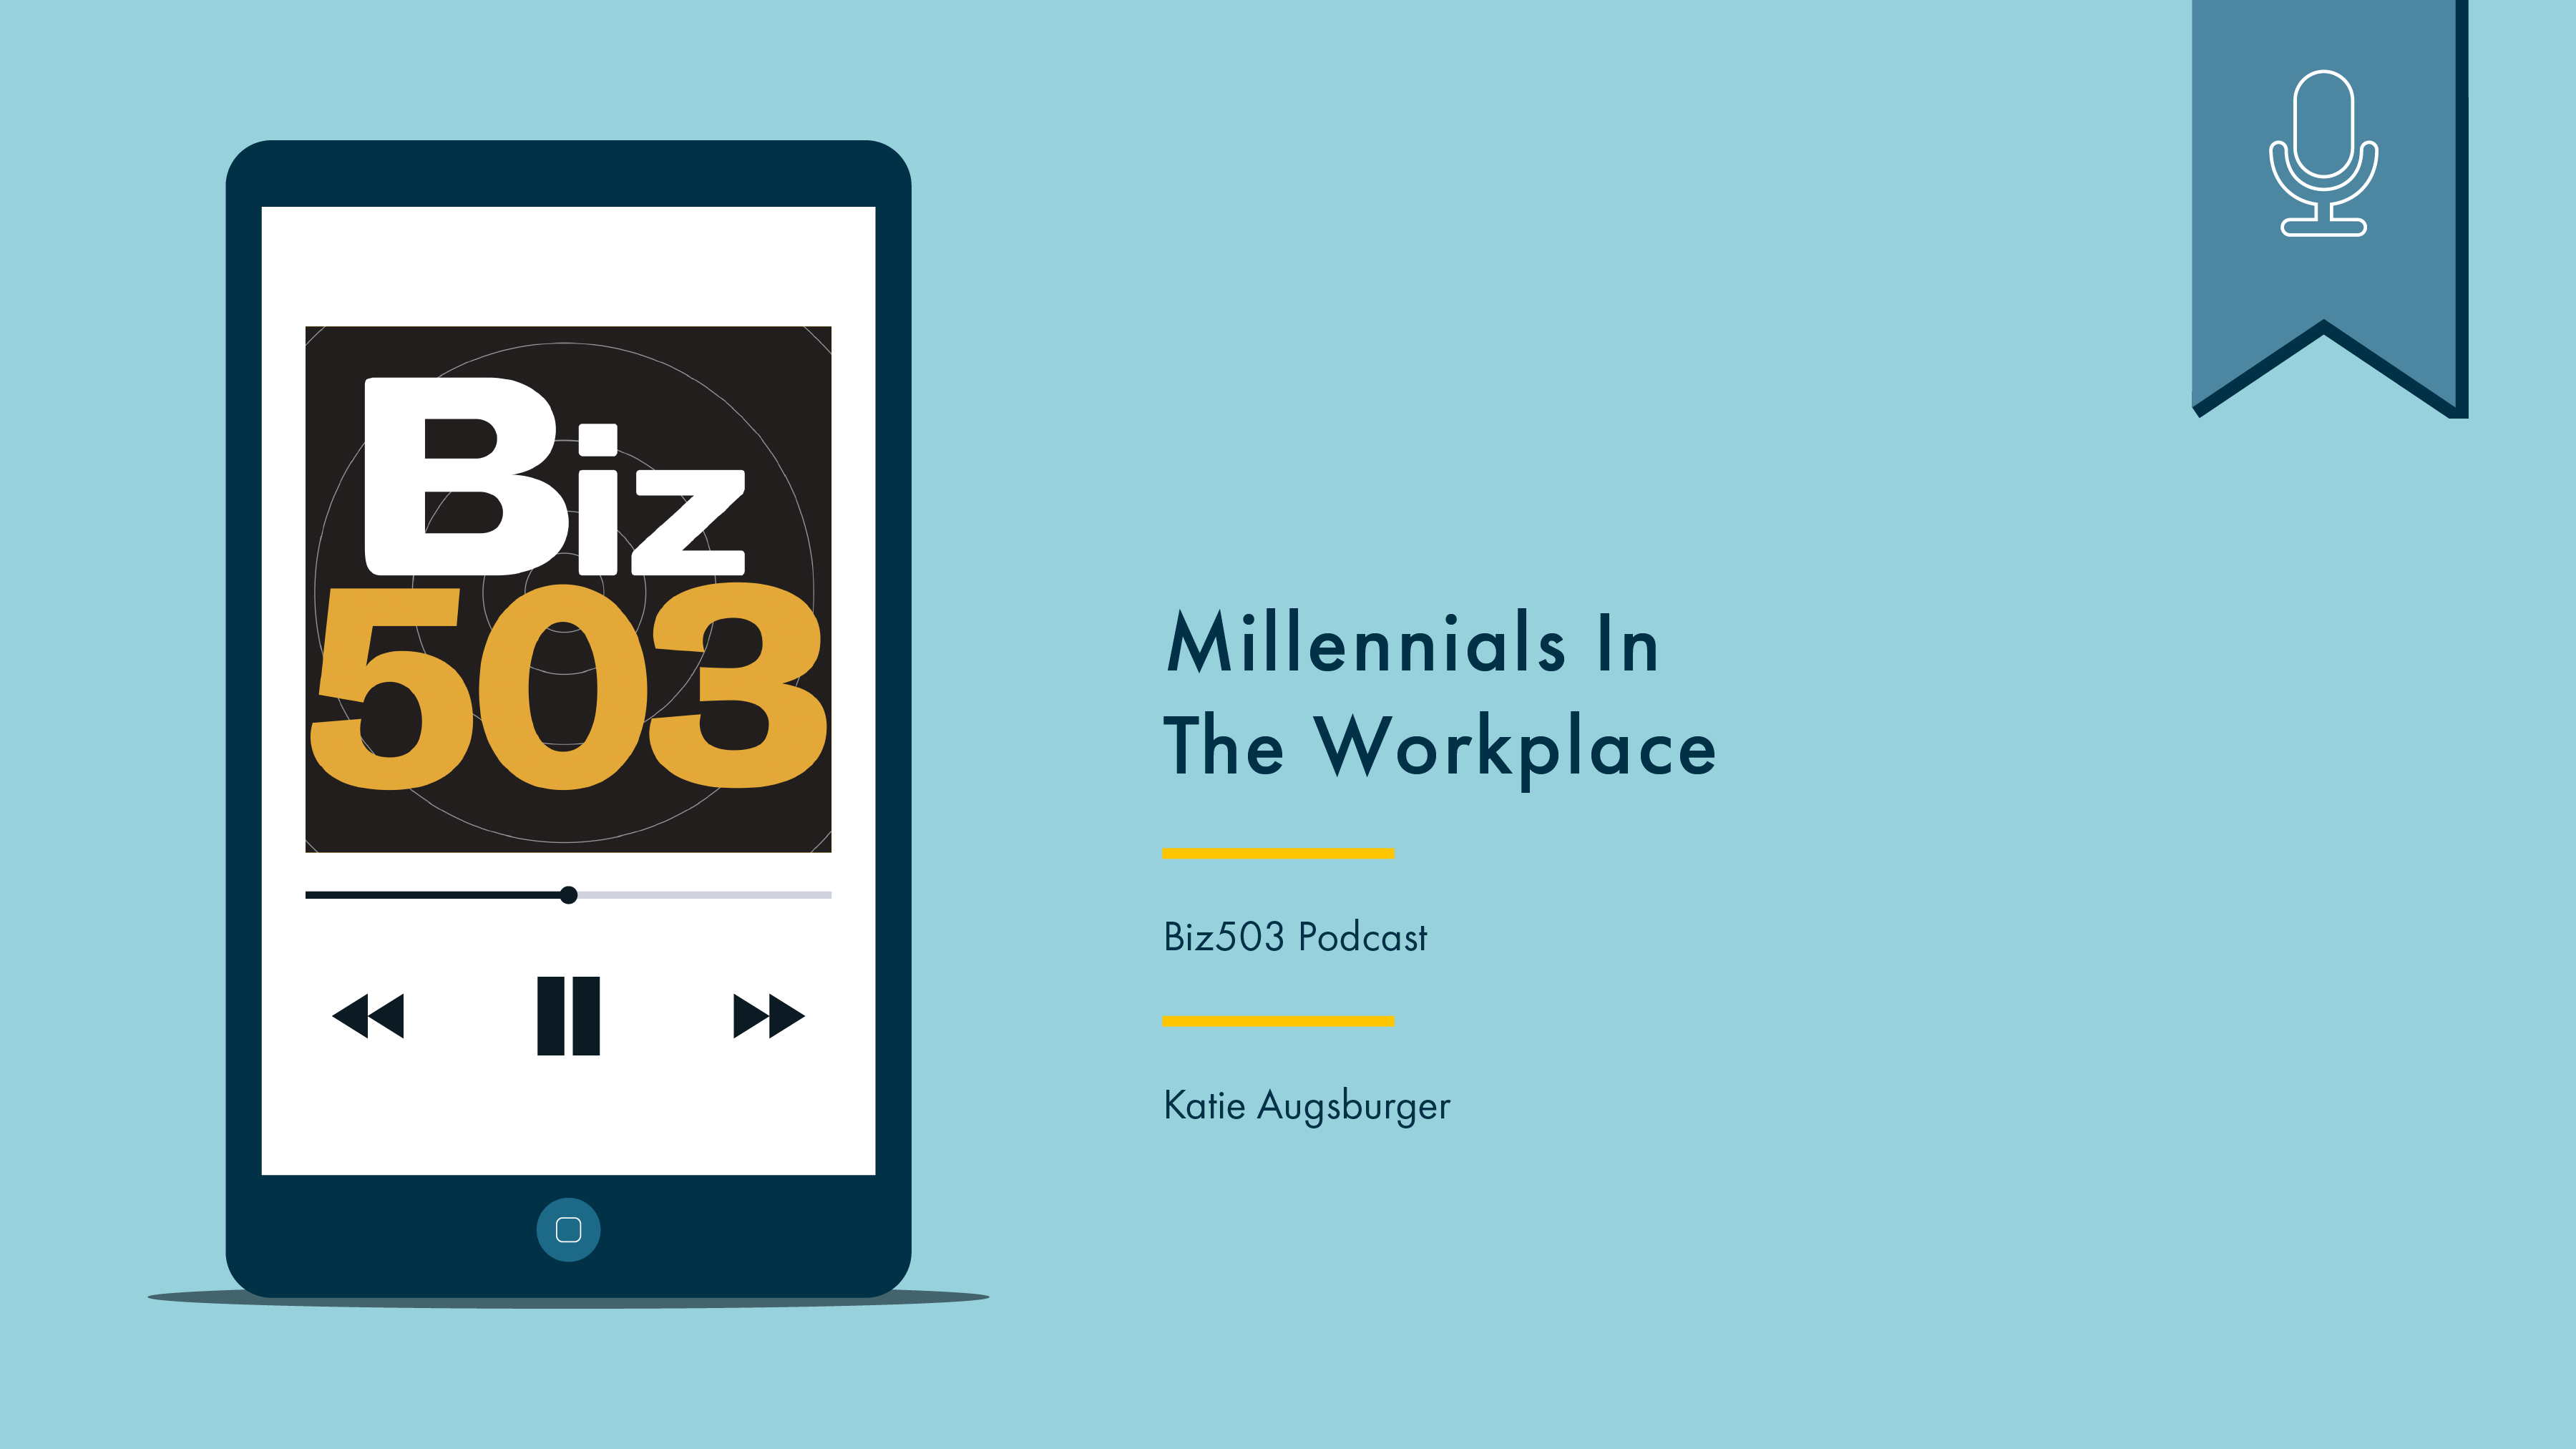 Phone with podcast artwork on the left. On the right reads “Millennials in the Workplace, Biz503 Podcast, Katie Augsburger.” Above is a blue flag with a white icon denoting that this is a podcast.